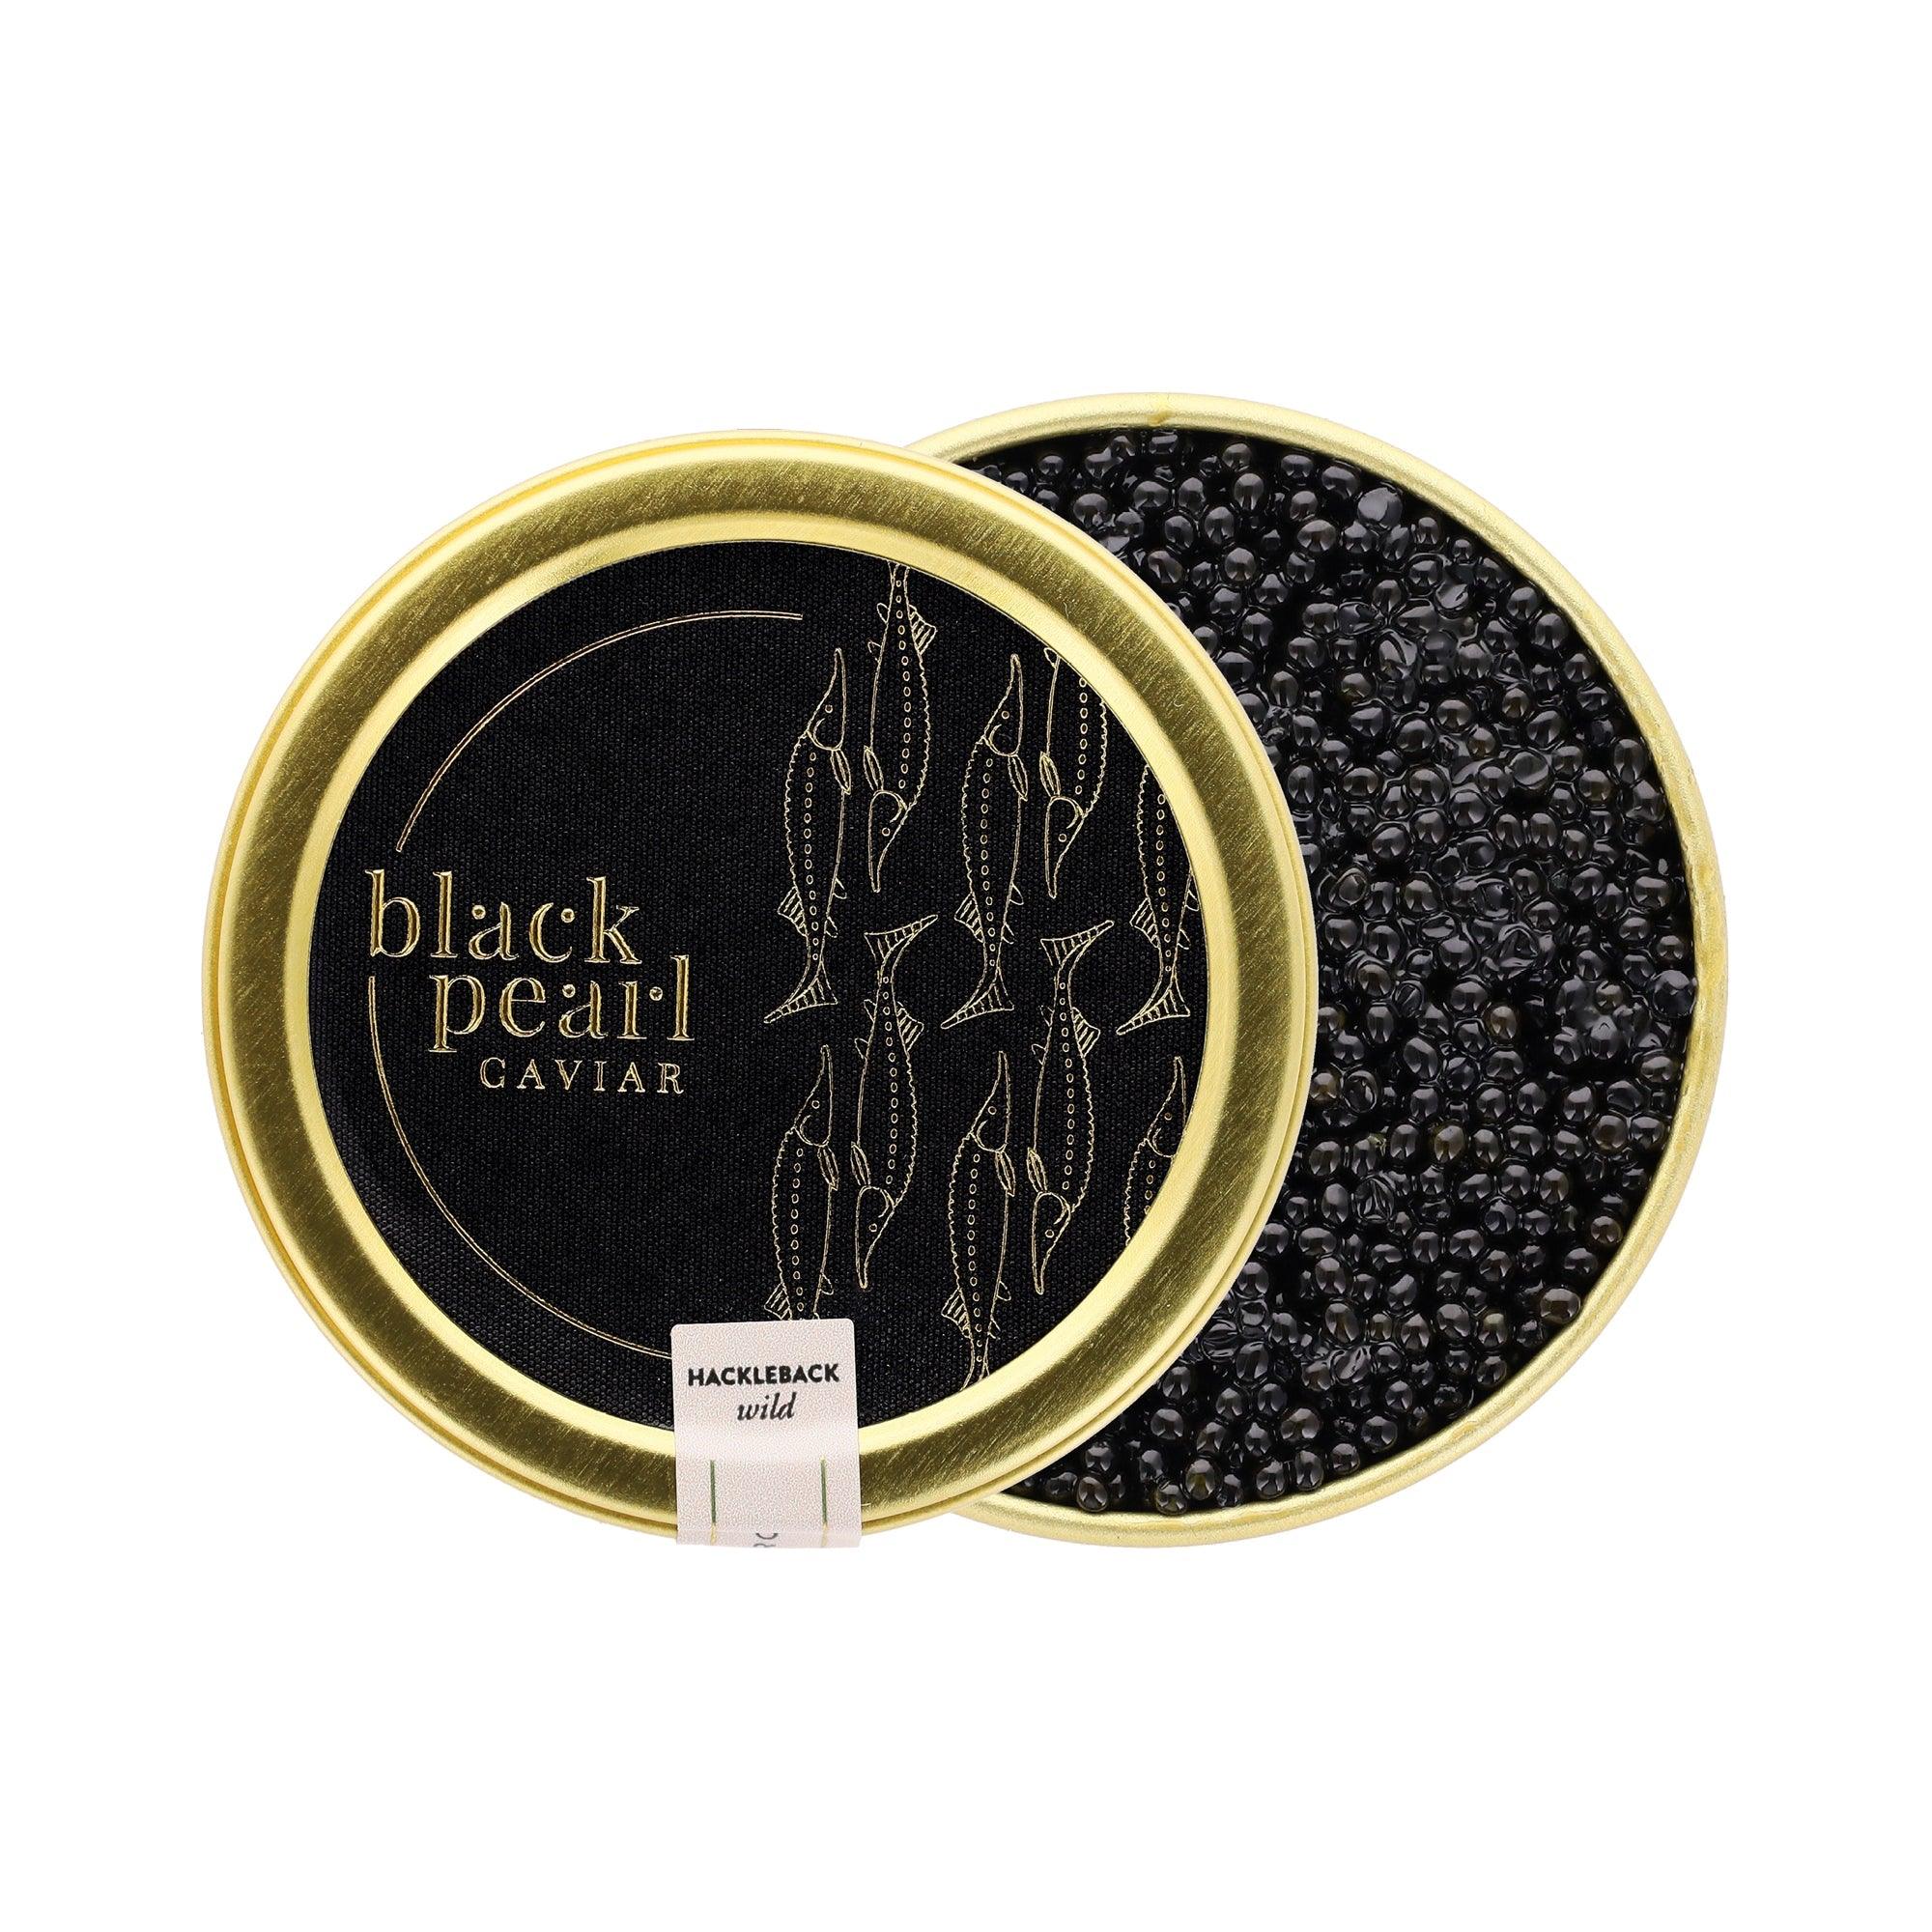 small black caviar, wild with strong flavors